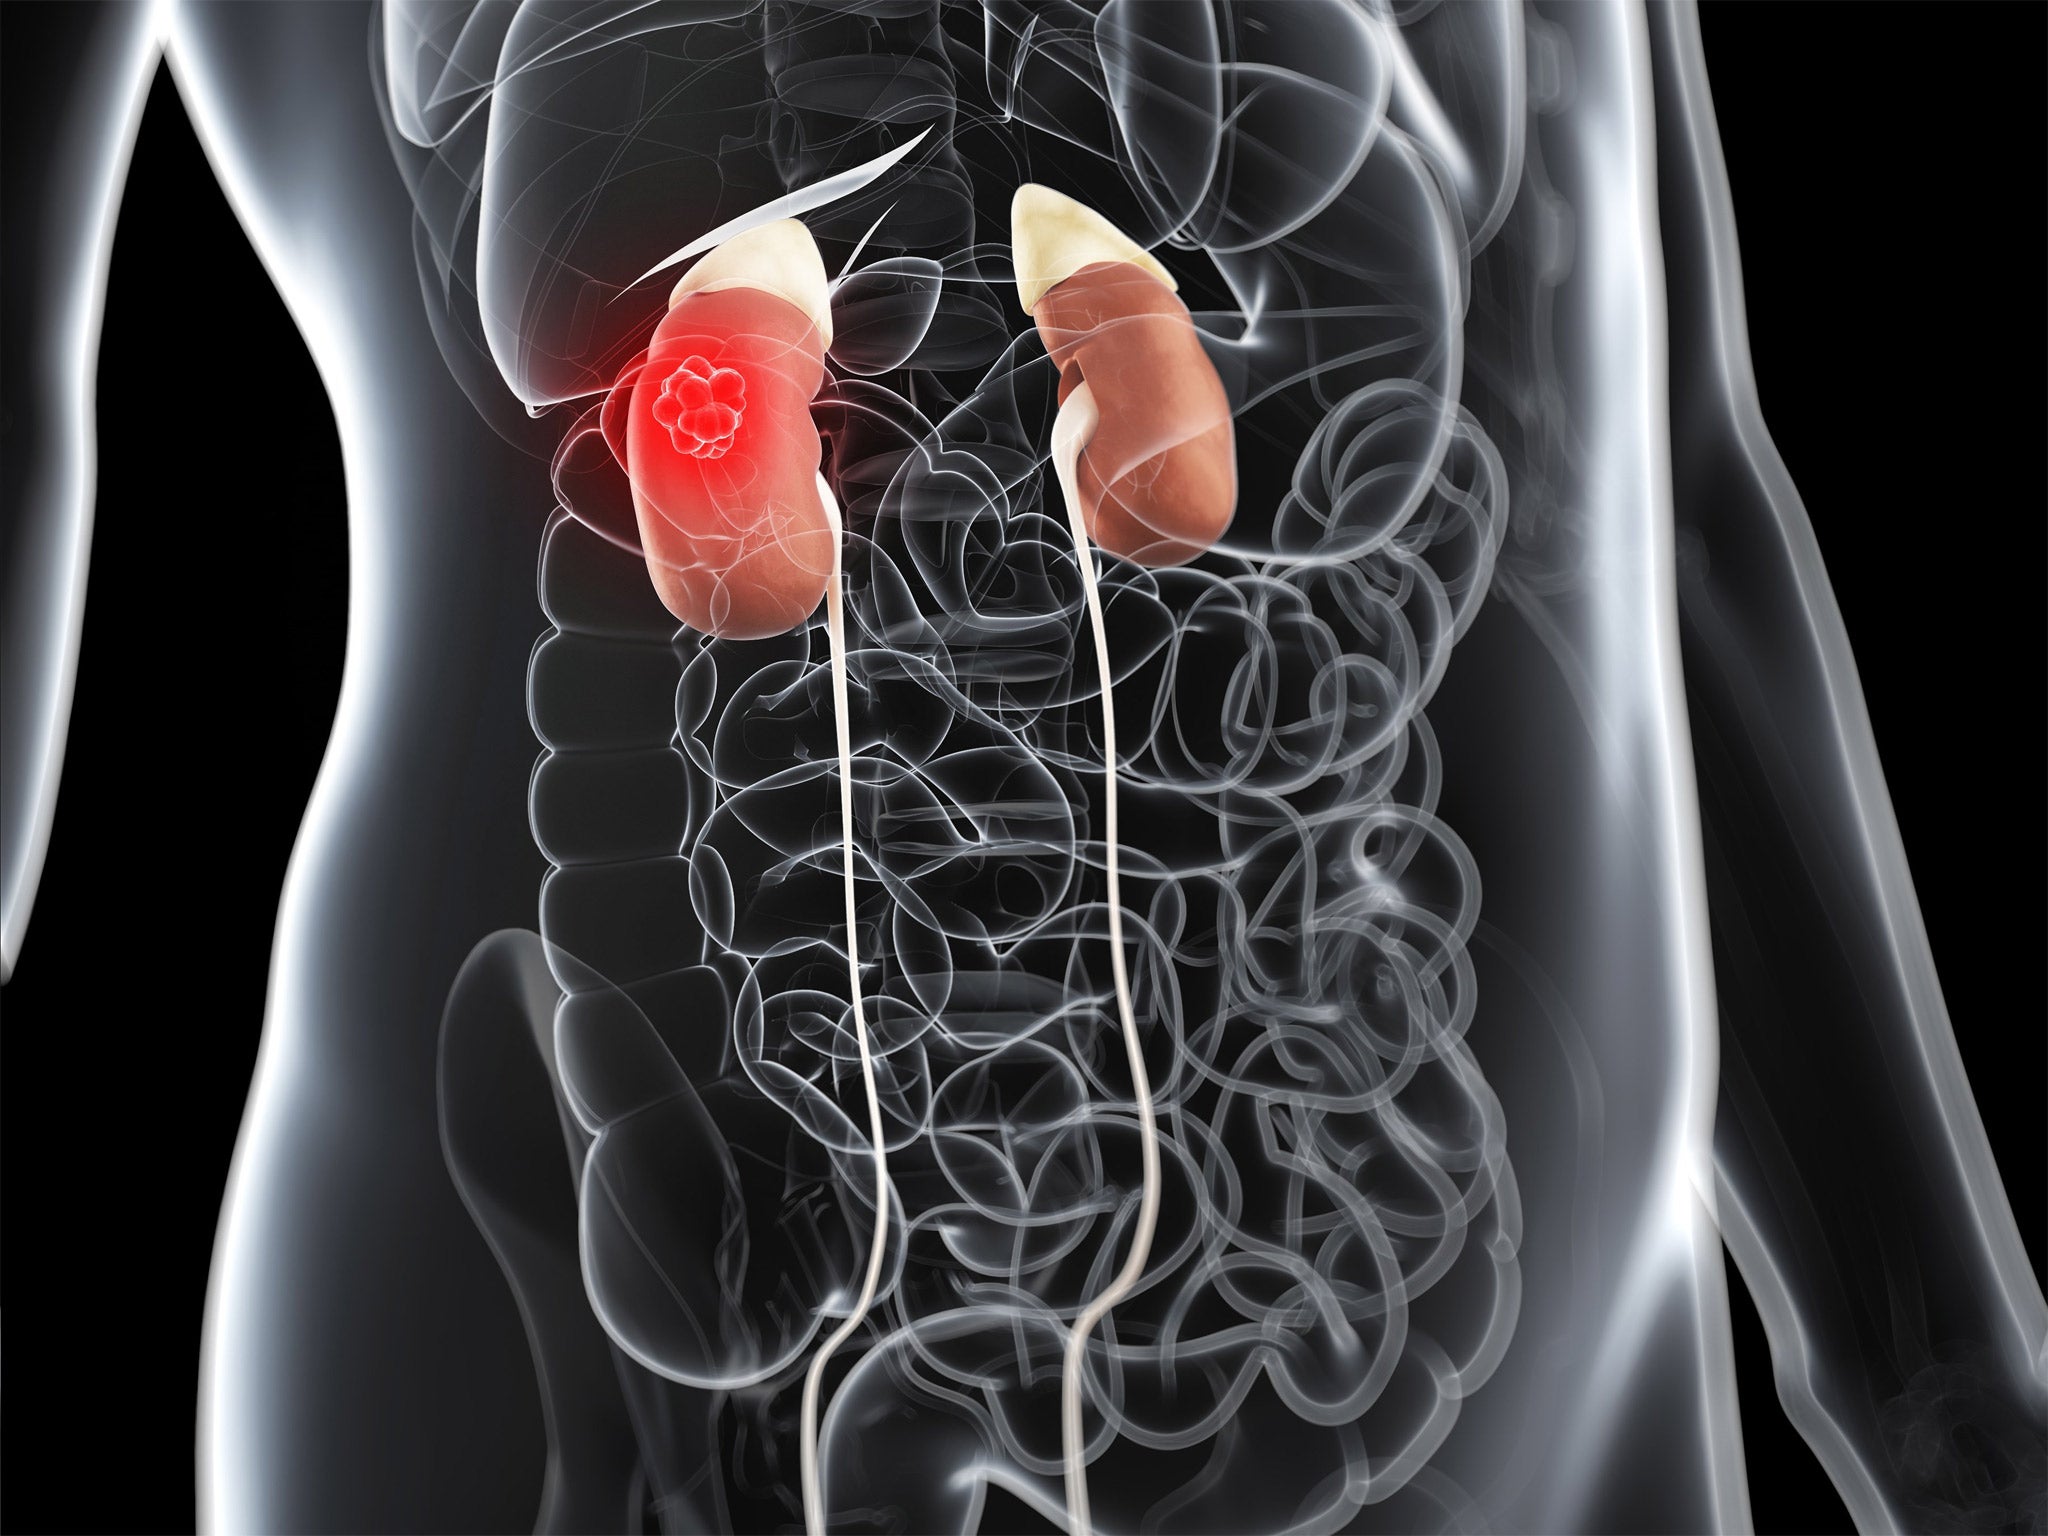 The kidneys filter toxic chemicals from the body and may become cancerous from a diet high in carcinogenic chemicals